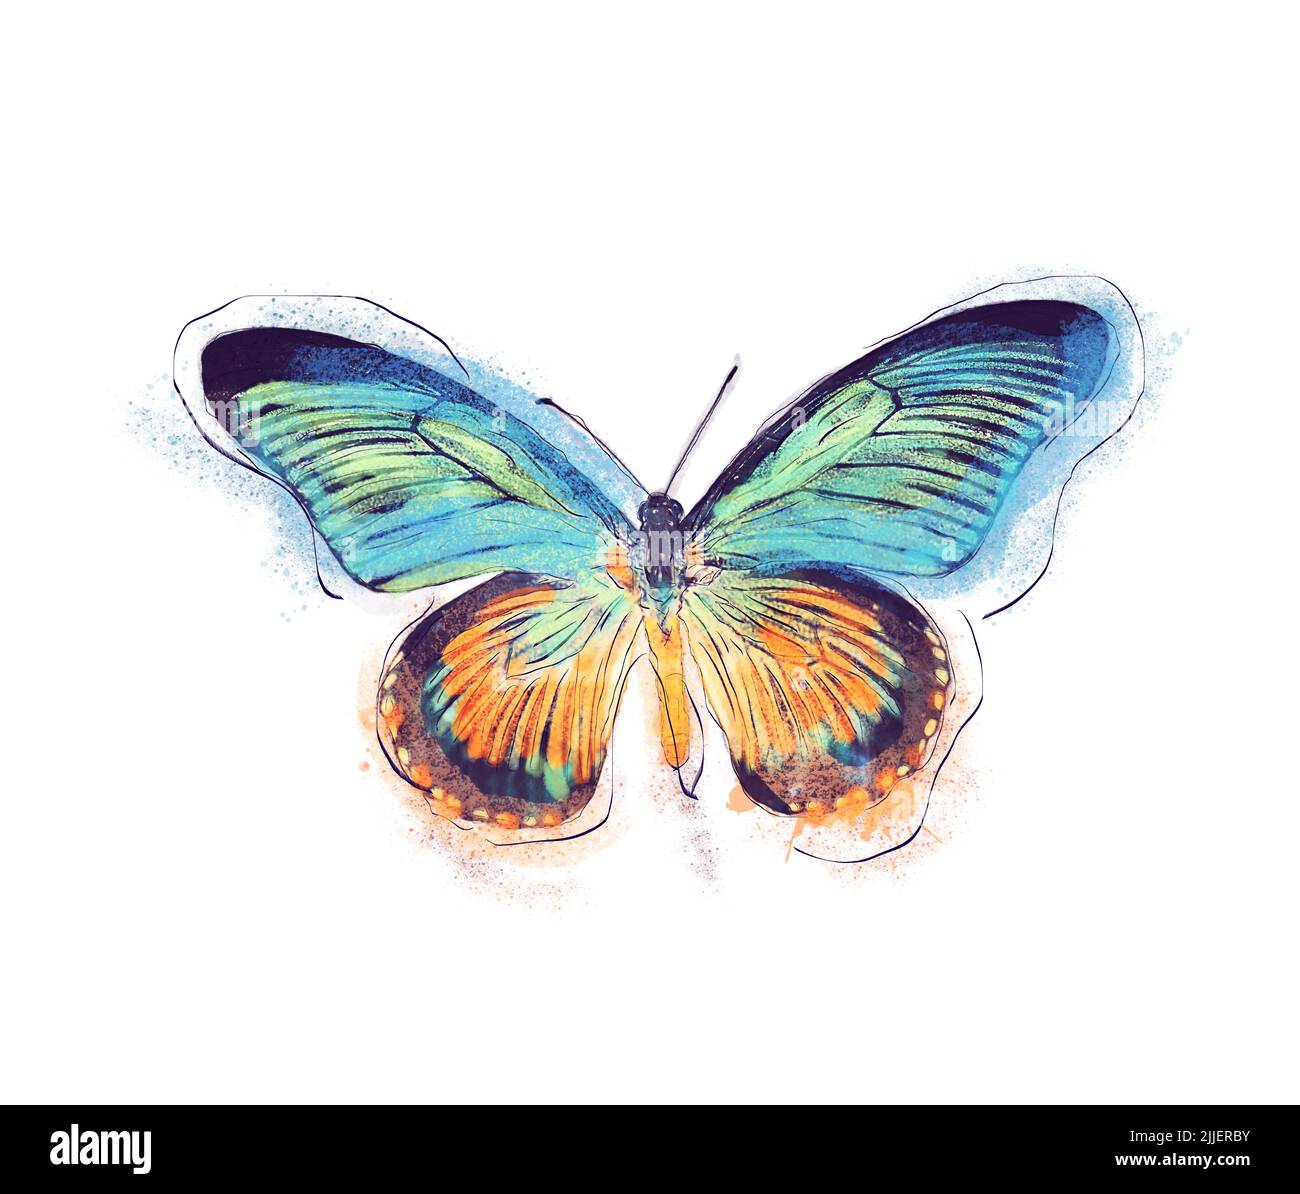 Watercolor Digital Painting of Tropical Butterfly on White Background Stock Photo